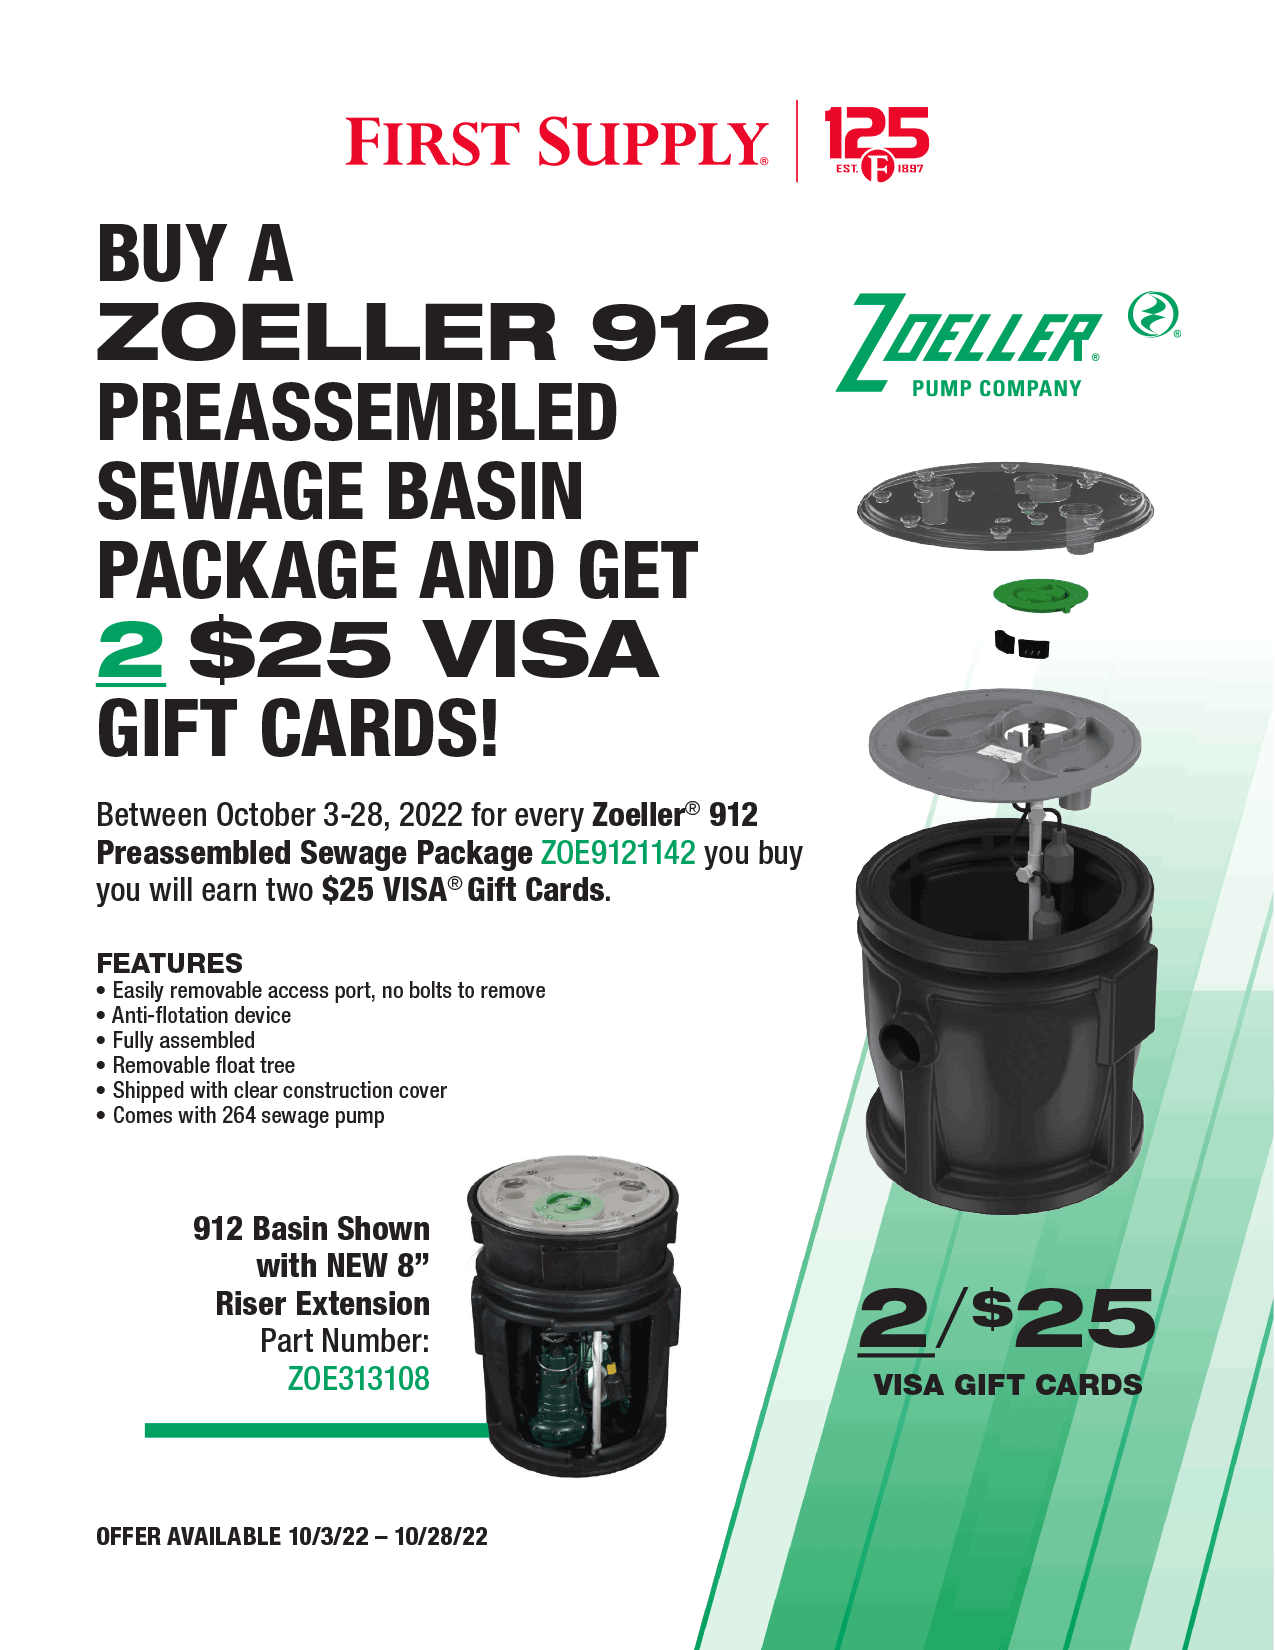 Buy a Zoeller 912 Preassembled Sewage Basin Package and Get 2 $25 VISA Gift Cards!